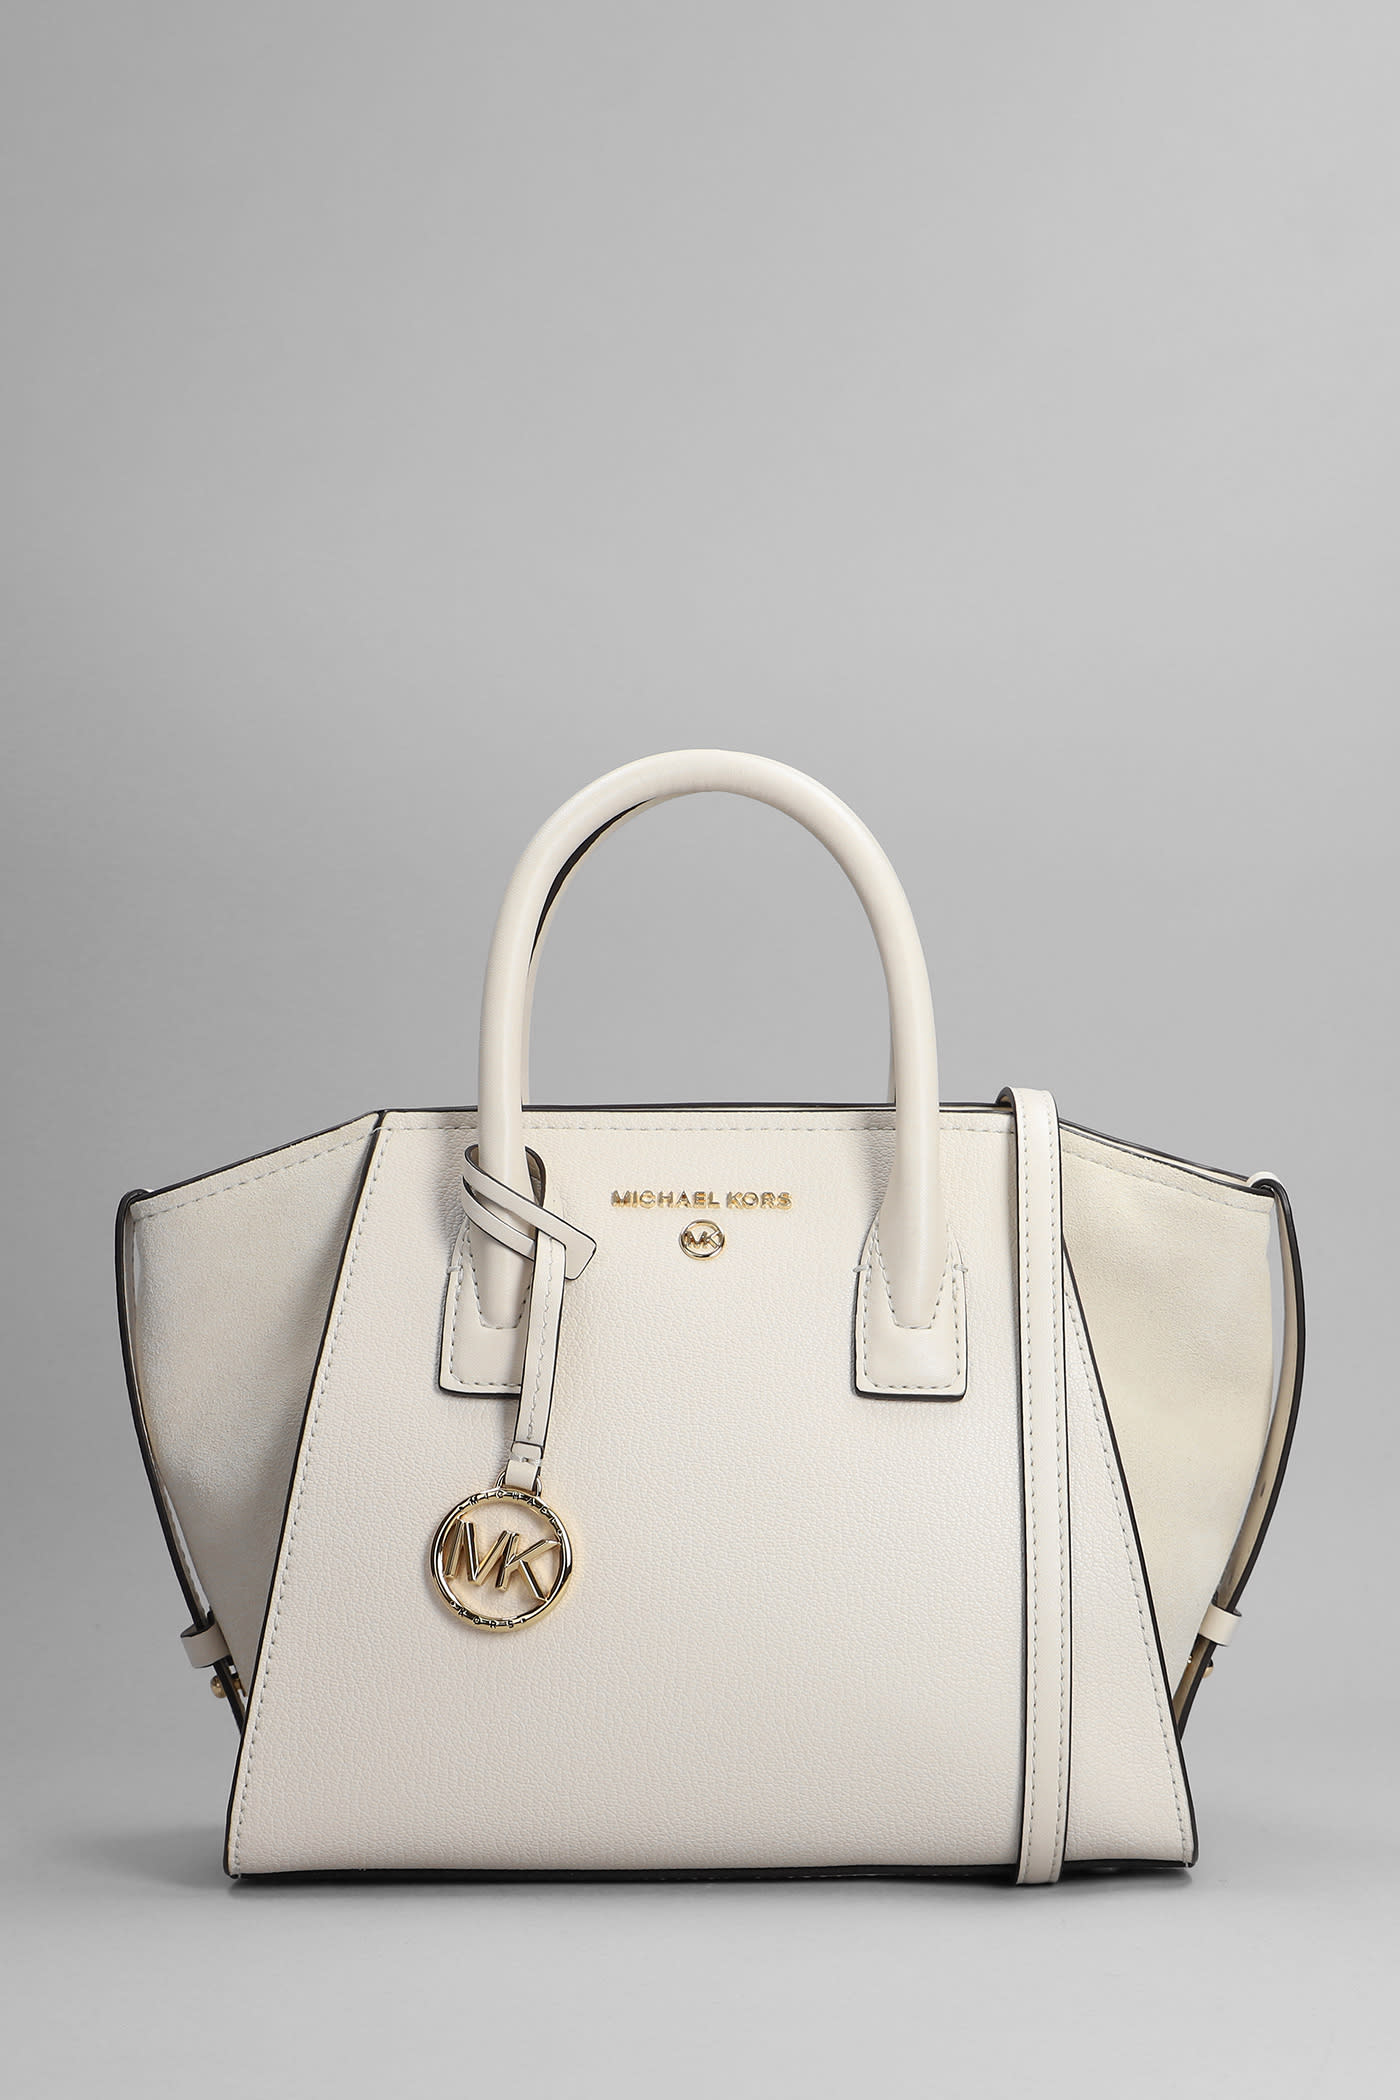 Michael Kors Avril Hand Bag In Beige Leather